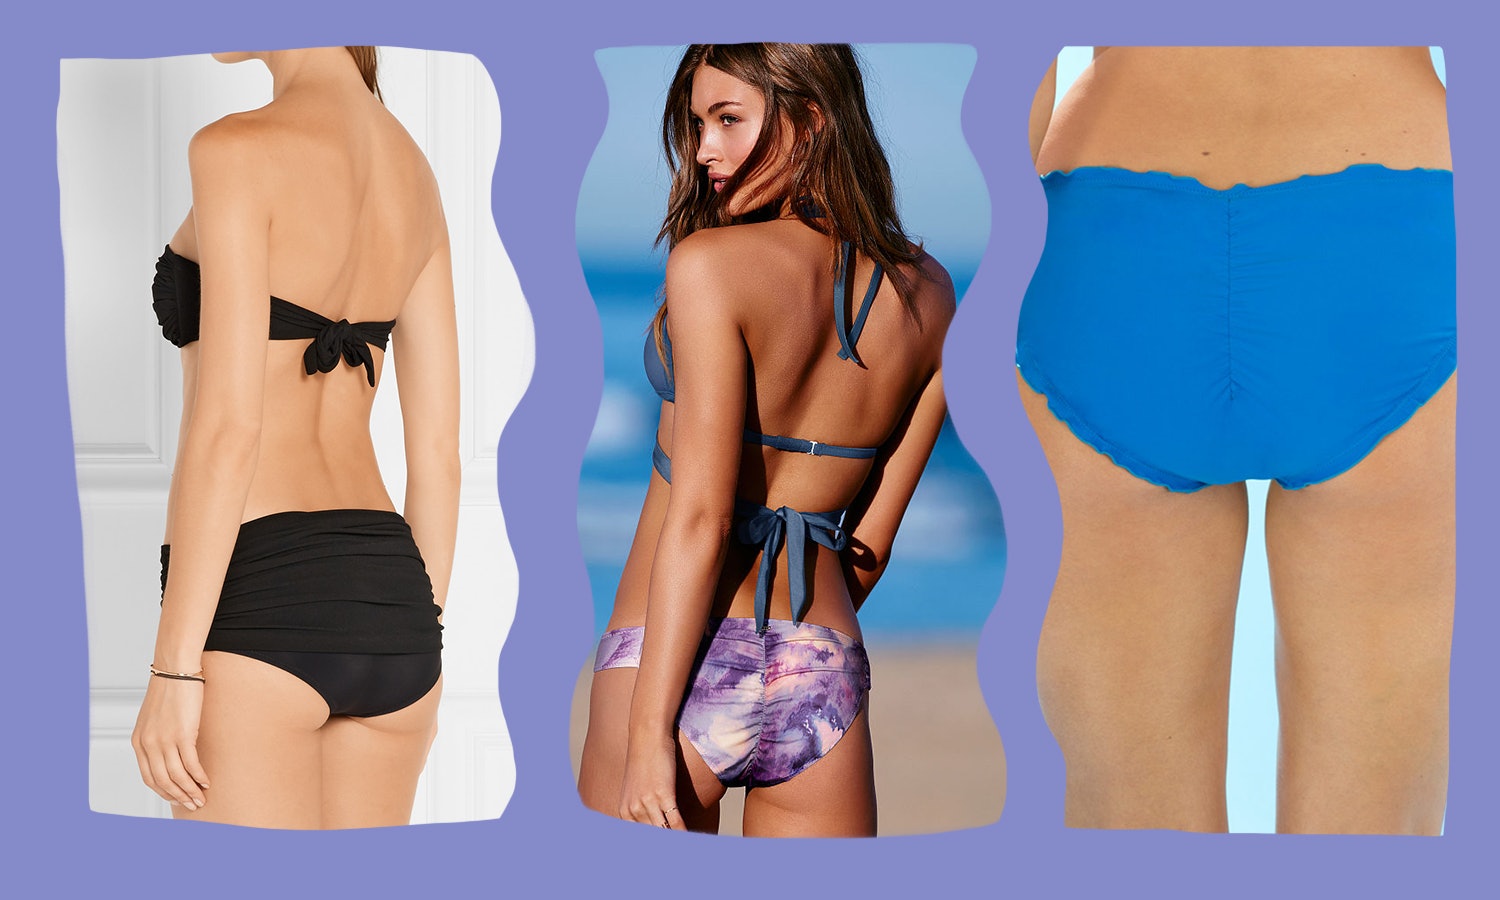 A No-Stress Guide To Finding The Best Swimsuit For Your Body